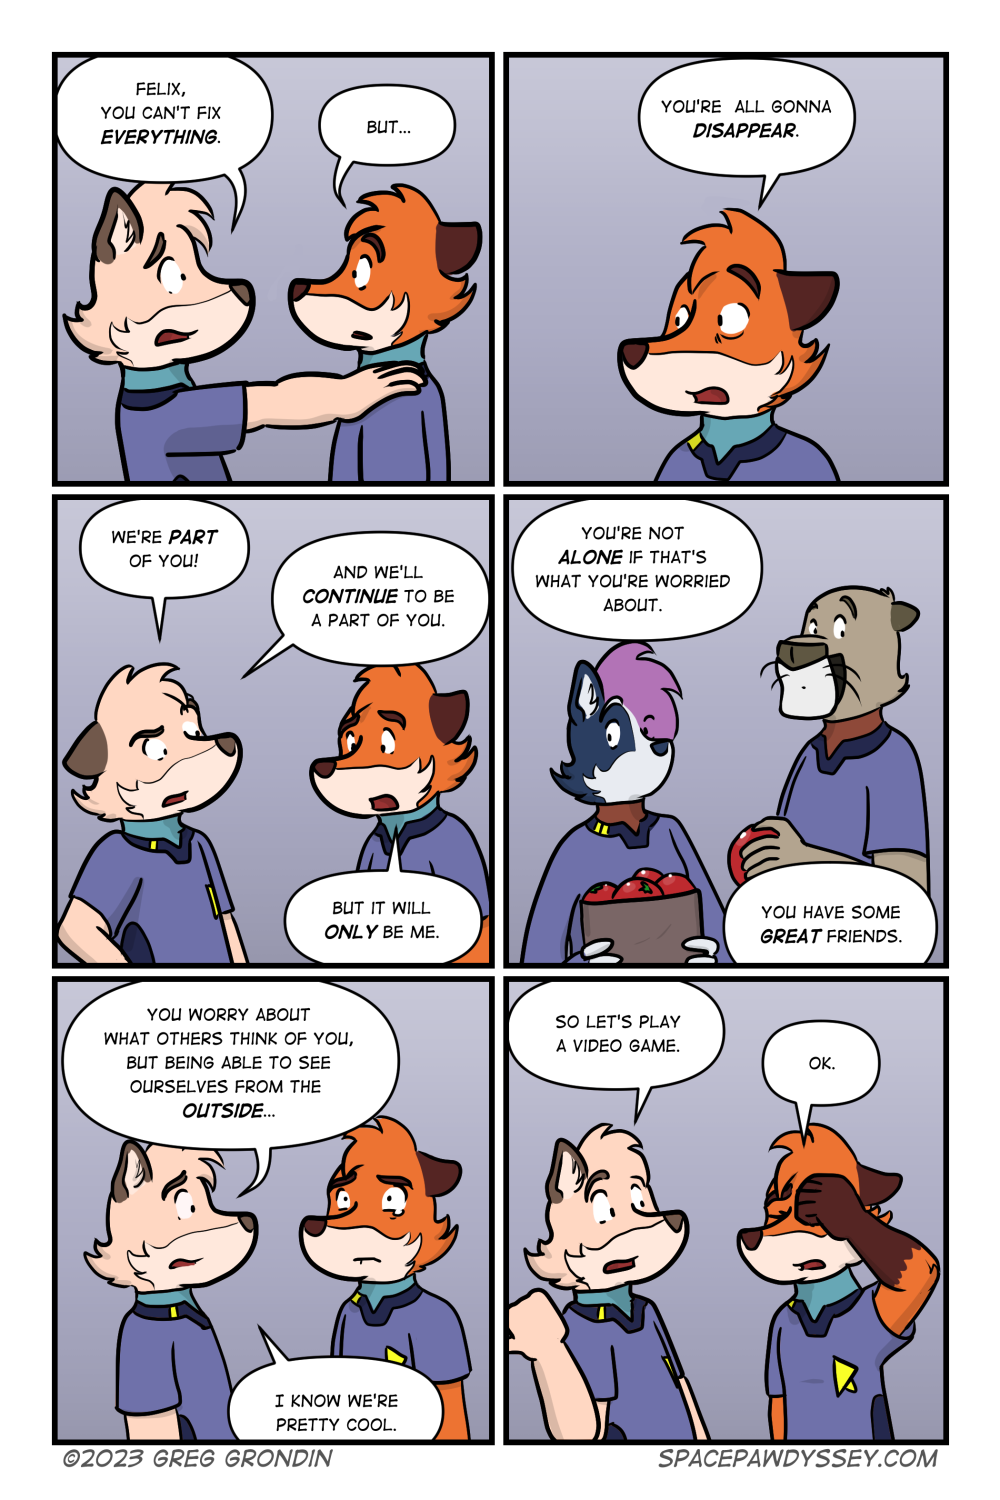 Space Pawdyssey #634